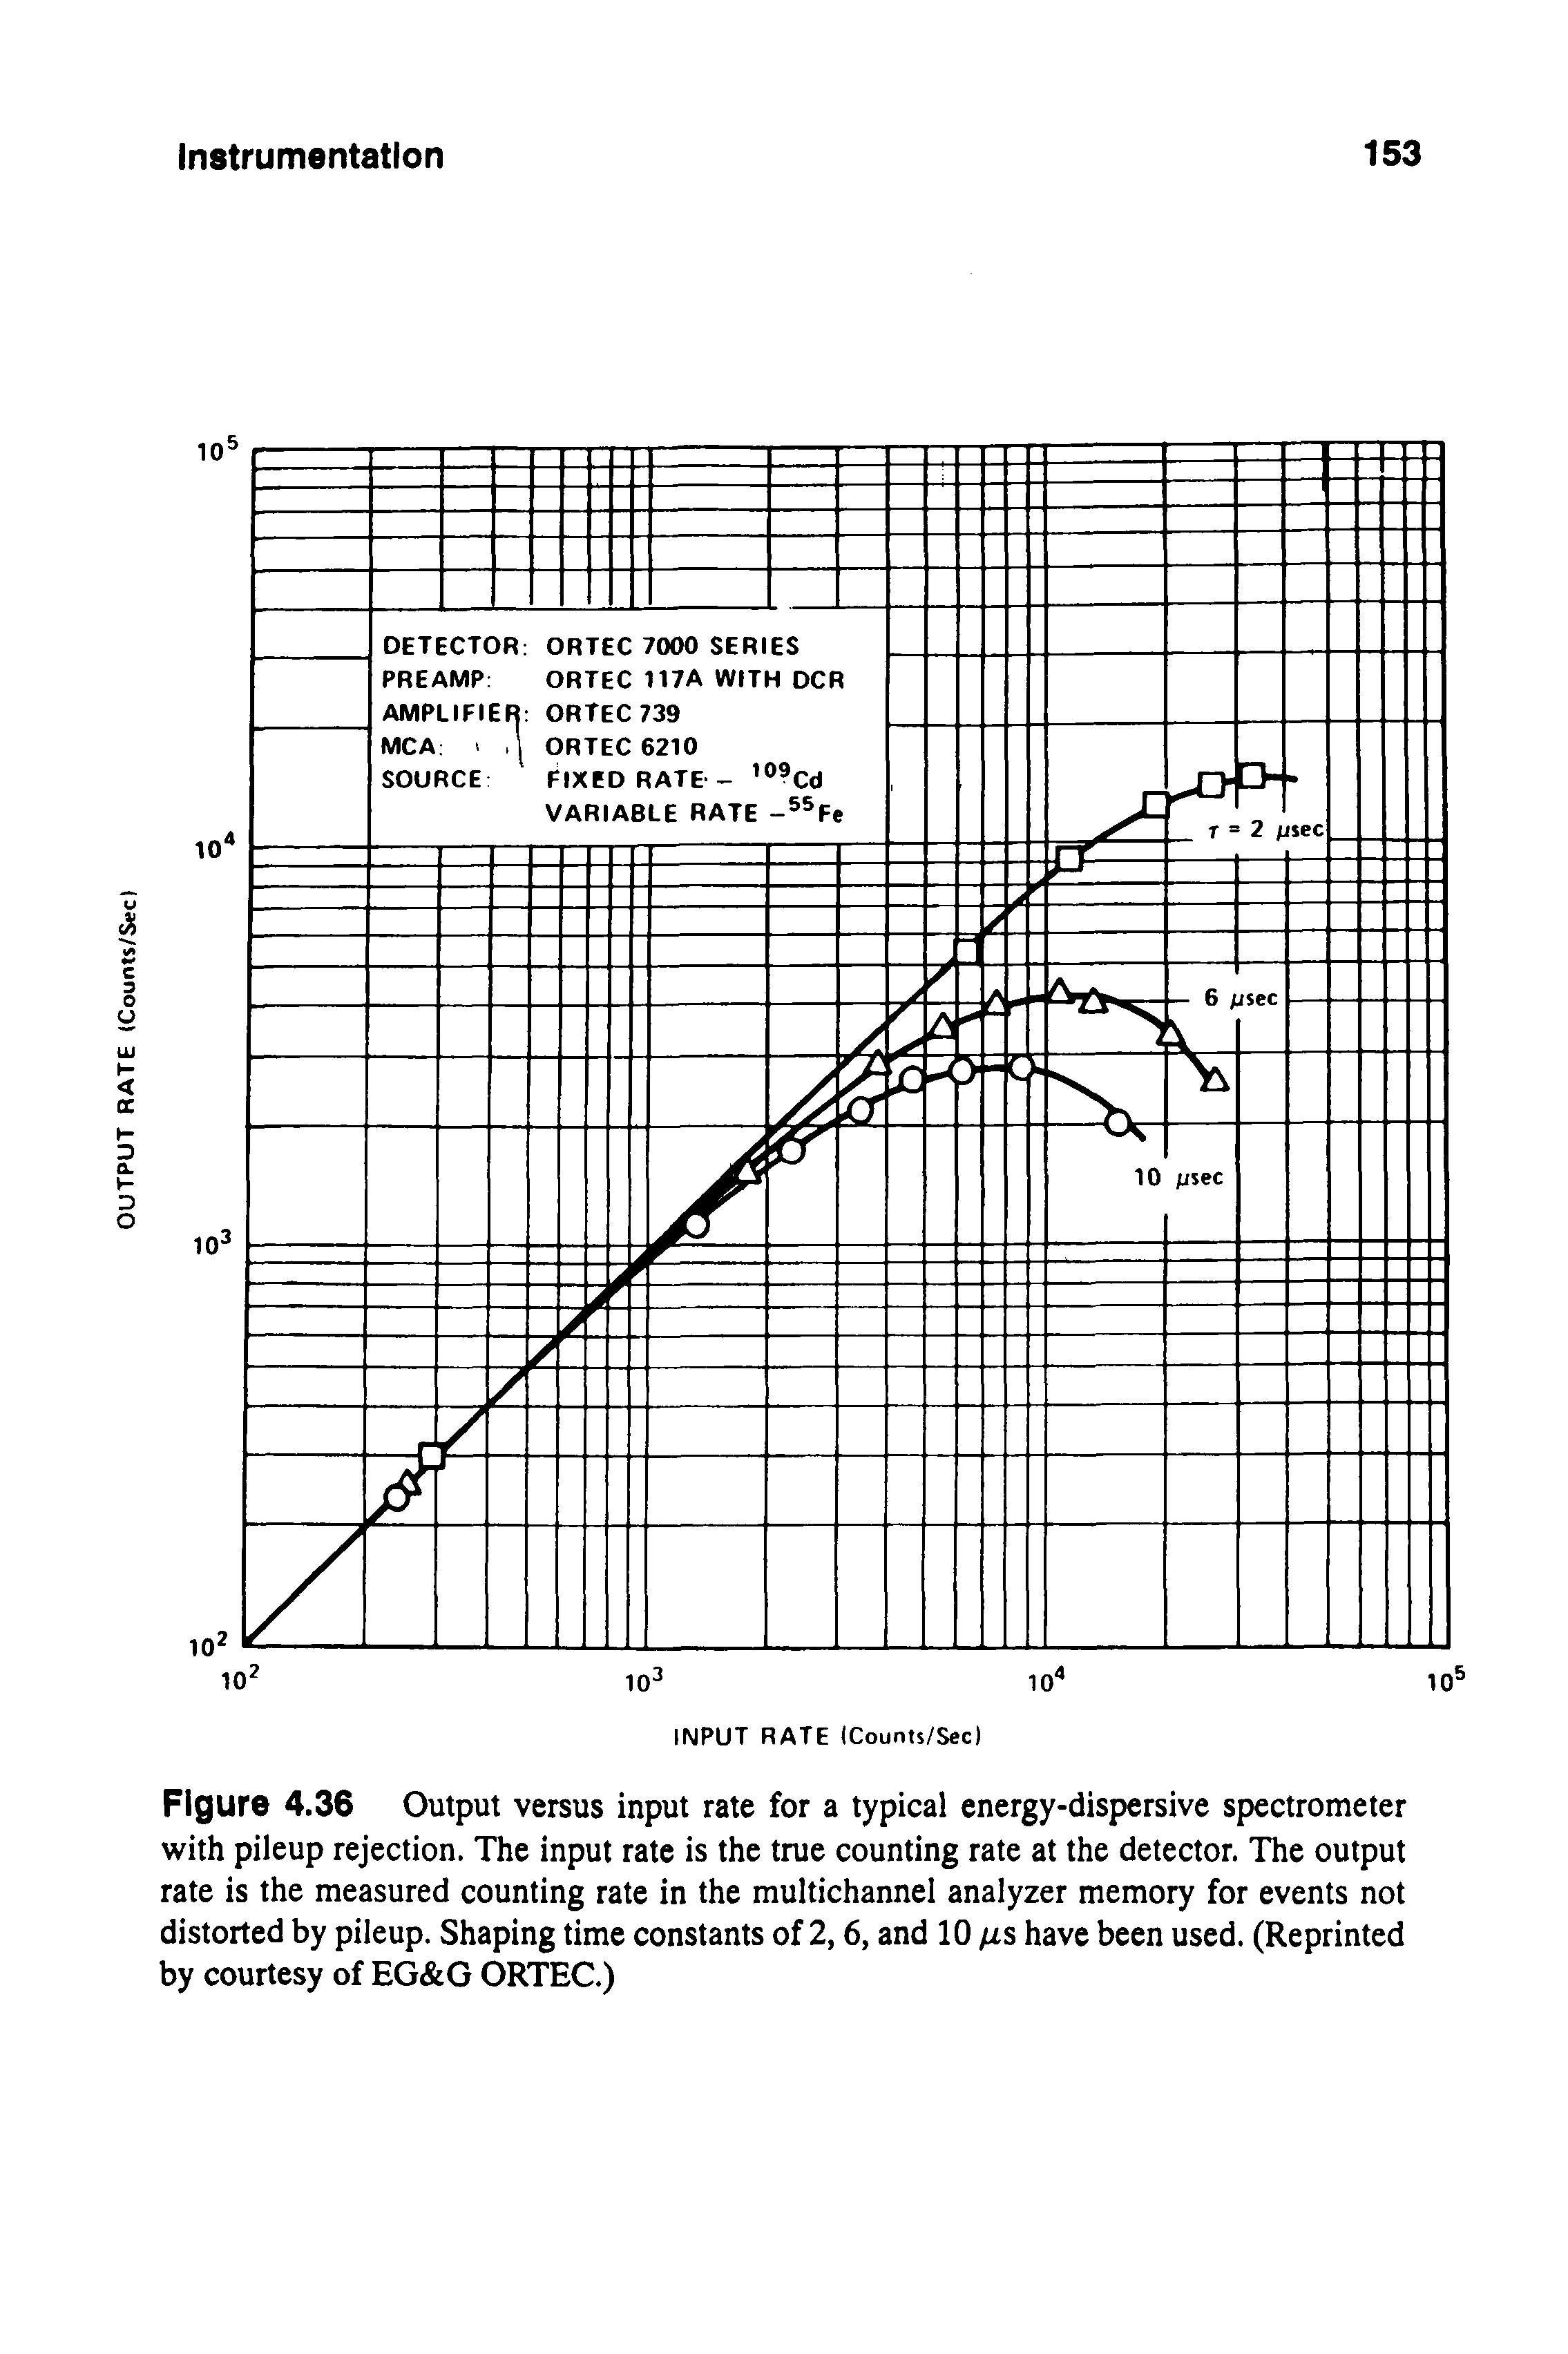 Figure 4.36 Output versus input rate for a typical energy-dispersive spectrometer with pileup rejection. The input rate is the true counting rate at the detector. The output rate is the measured counting rate in the multichannel analyzer memory for events not distorted by pileup. Shaping time constants of 2,6, and 10 fis have been used. (Reprinted by courtesy of EG G ORTEC.)...